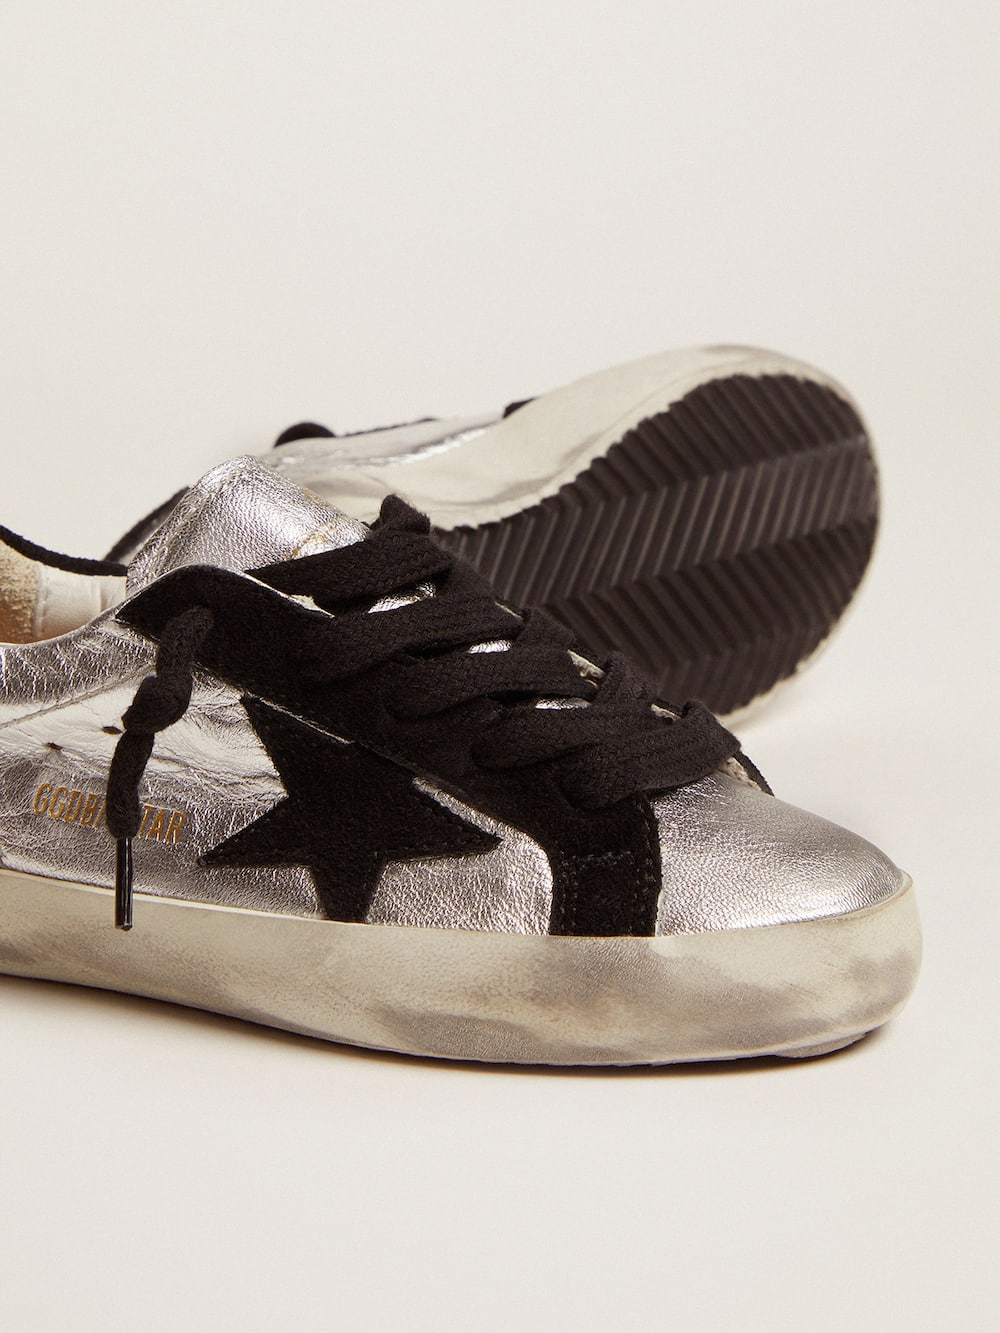 Golden Goose - Super-Star sneakers in silver leather with suede inserts in 